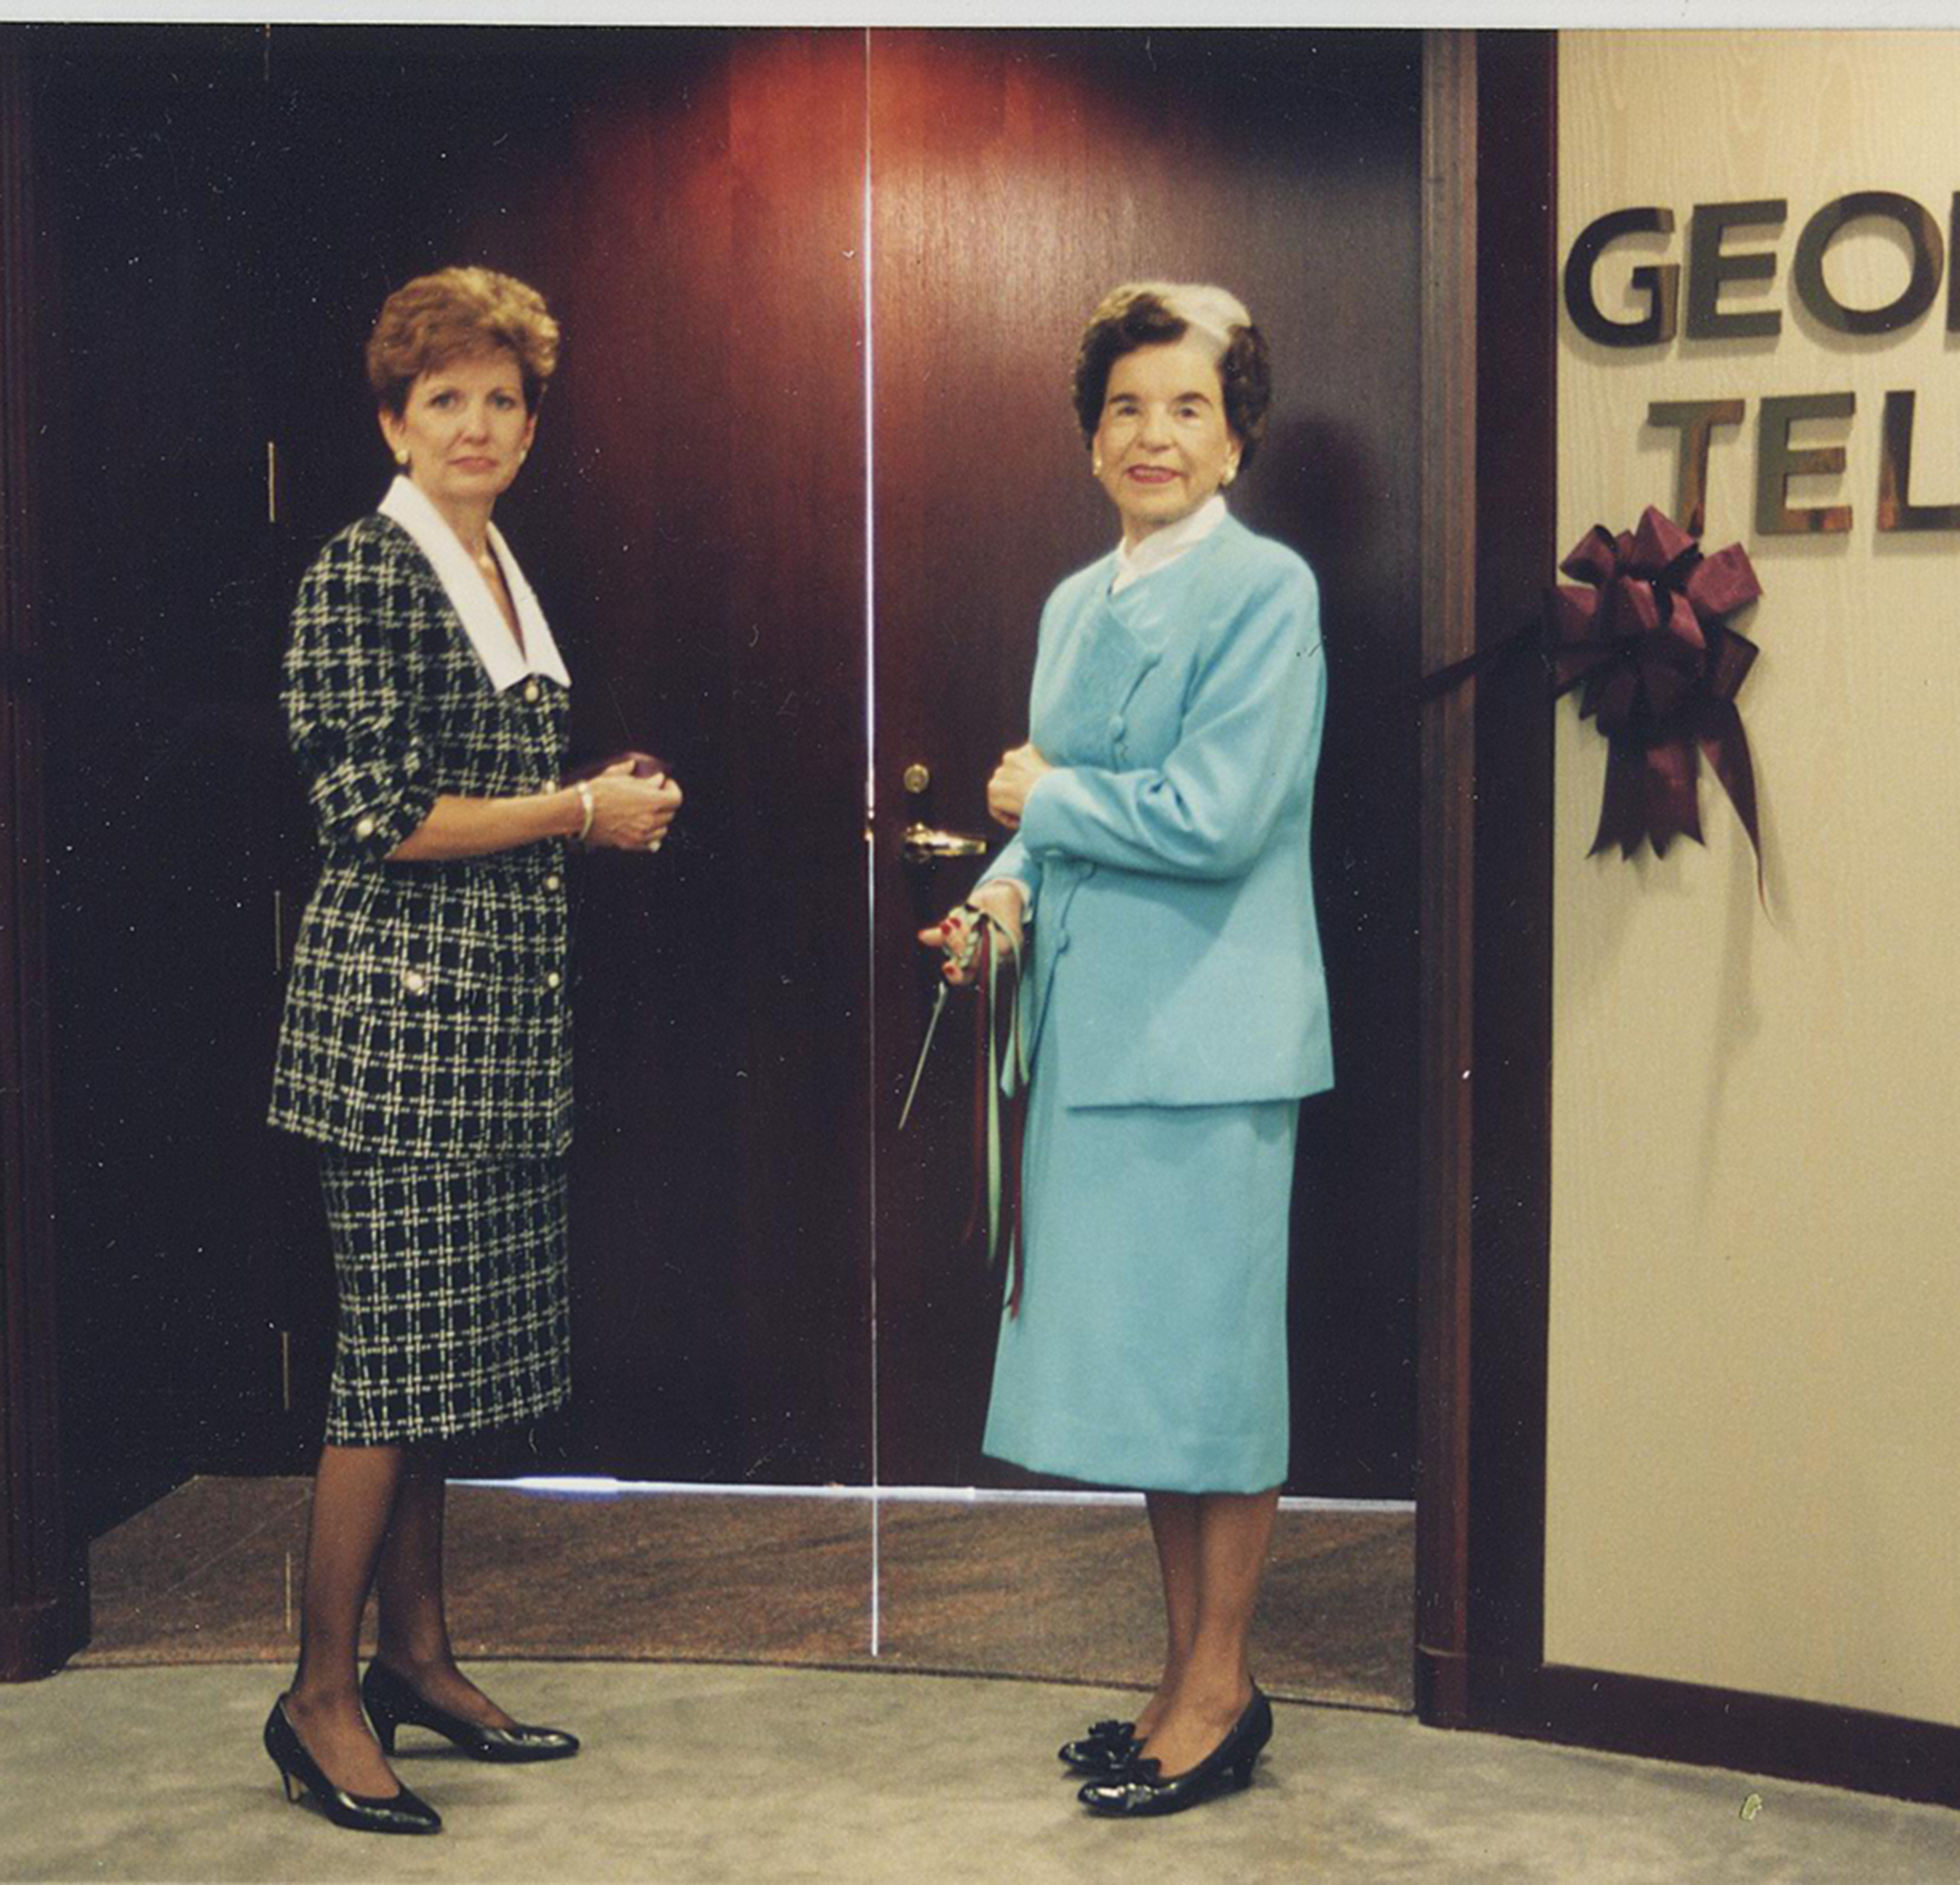 Former Georgia's Own CEOs Charlotte Ayers (on left) and Eloise Woods (on right)